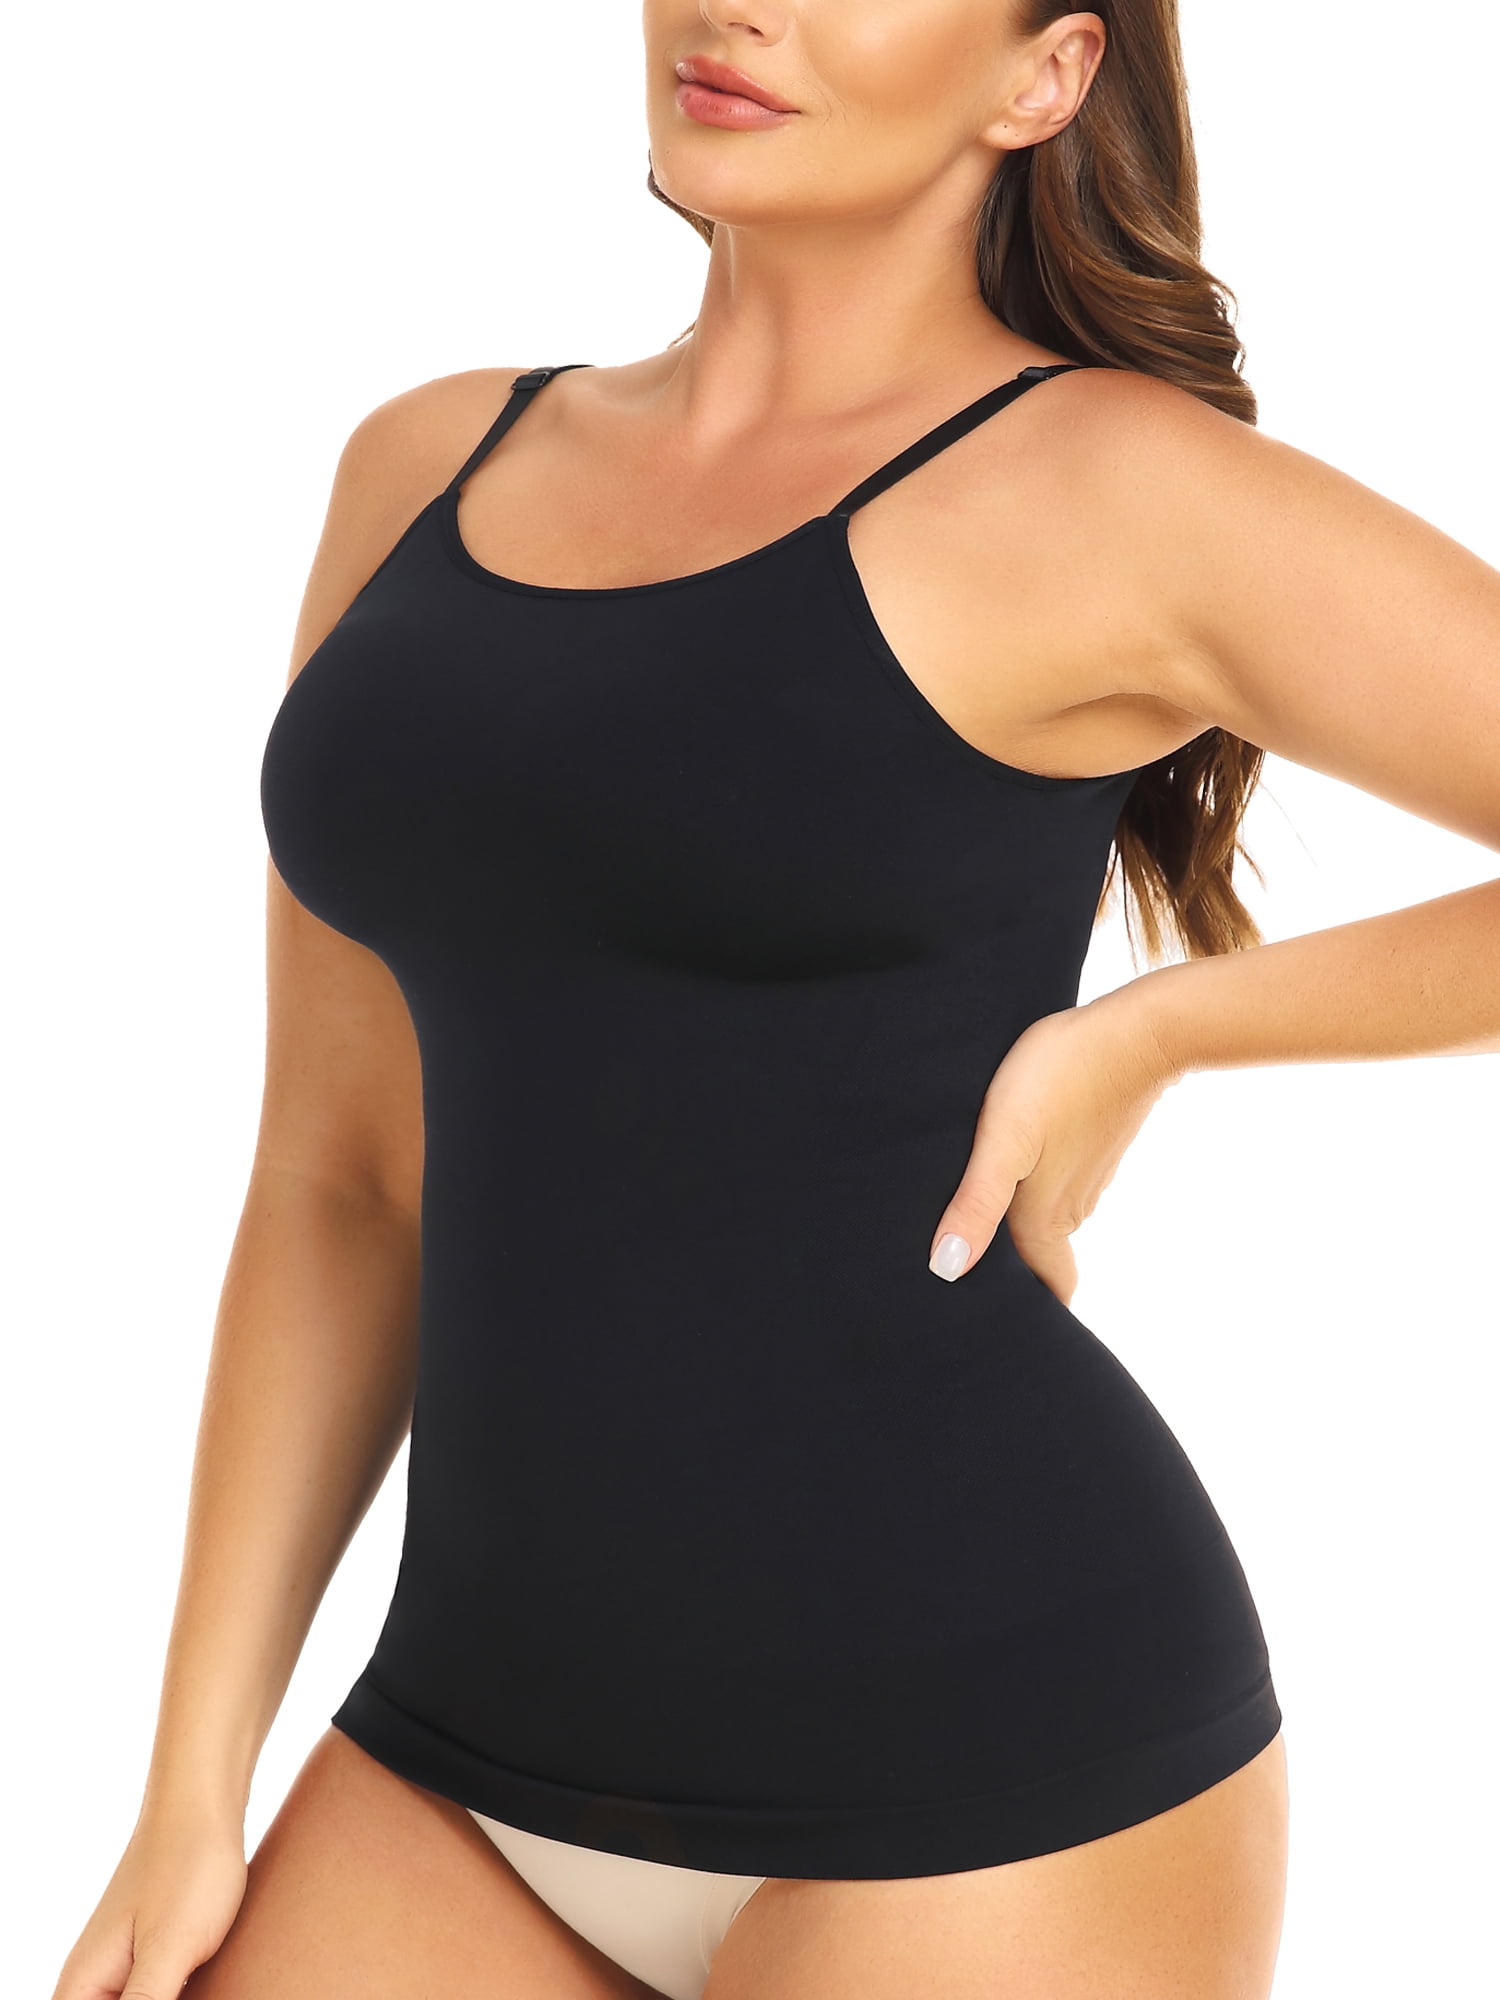 MISS MOLY Women's Cami Shaper Compression Tank Tops Tummy Control  Adjustable Straps Body Shaper Camisoles 